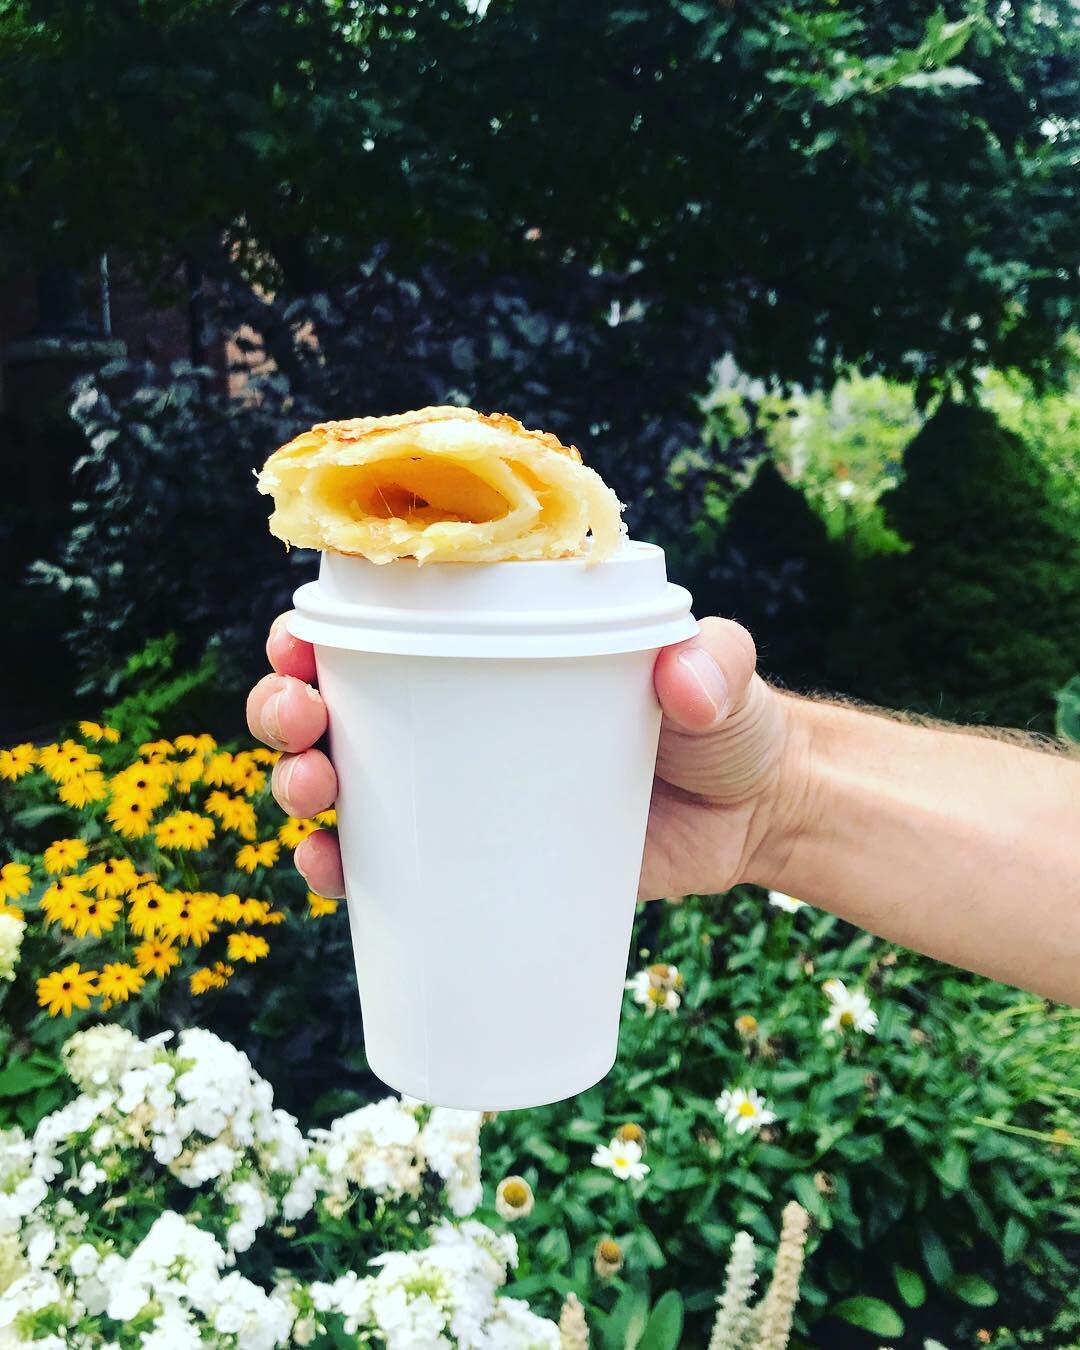 When you got the city&rsquo;s best latte &amp; a caramelized onion + gruyere 🥐, suddenly life&rsquo;s a walk in the freakin&rsquo; park. #shmoozin #eastend #toronto #coffeebreak #croissant #stopandsmelltheflowers